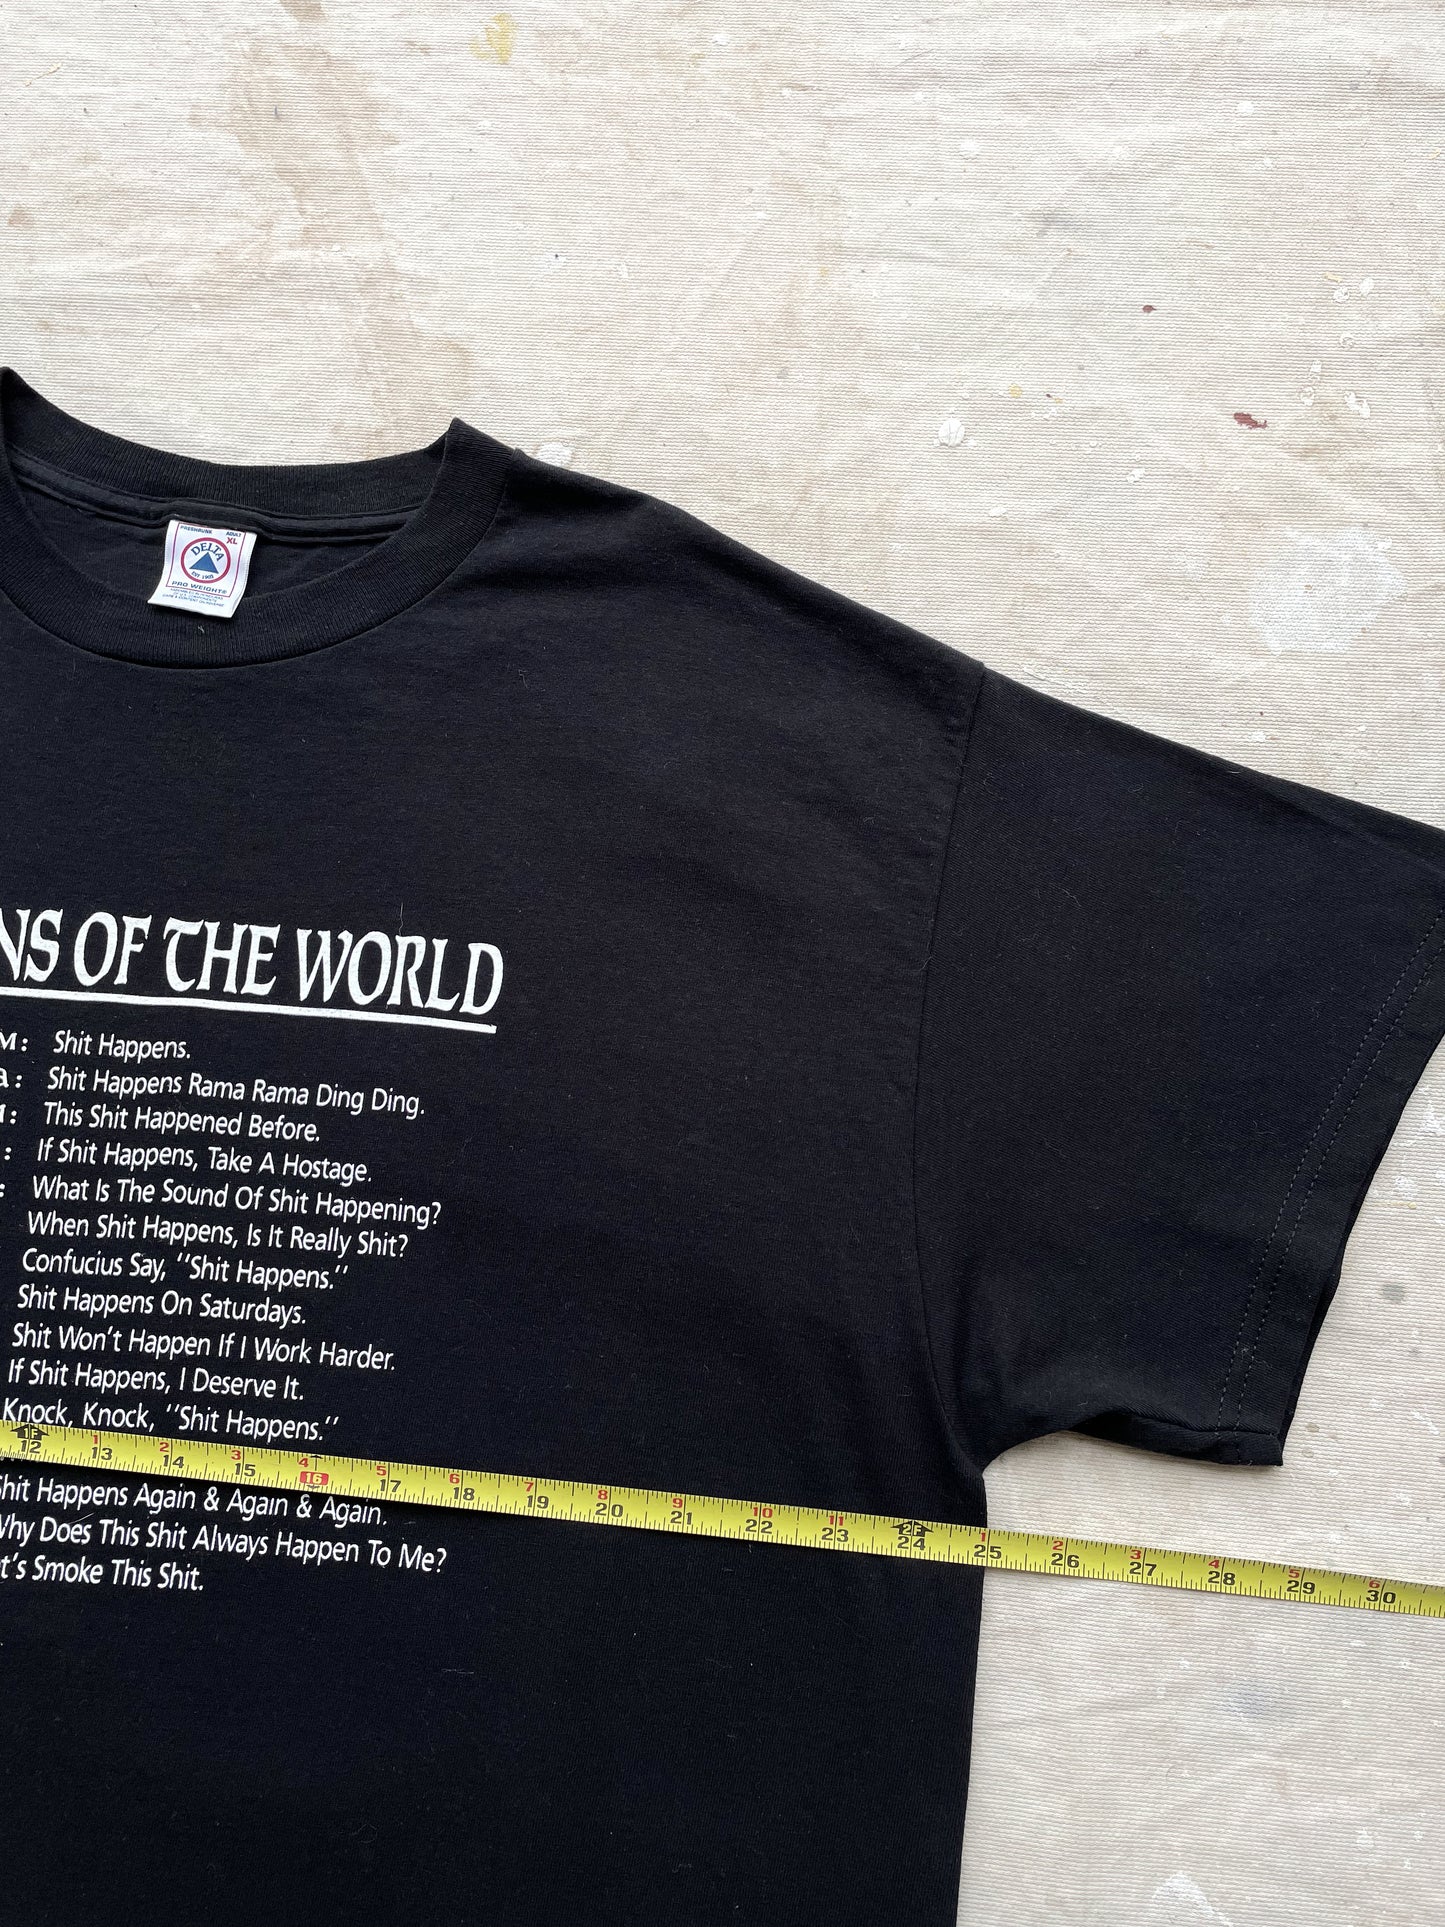 "Religions Of The World" T-Shirt—[XL]